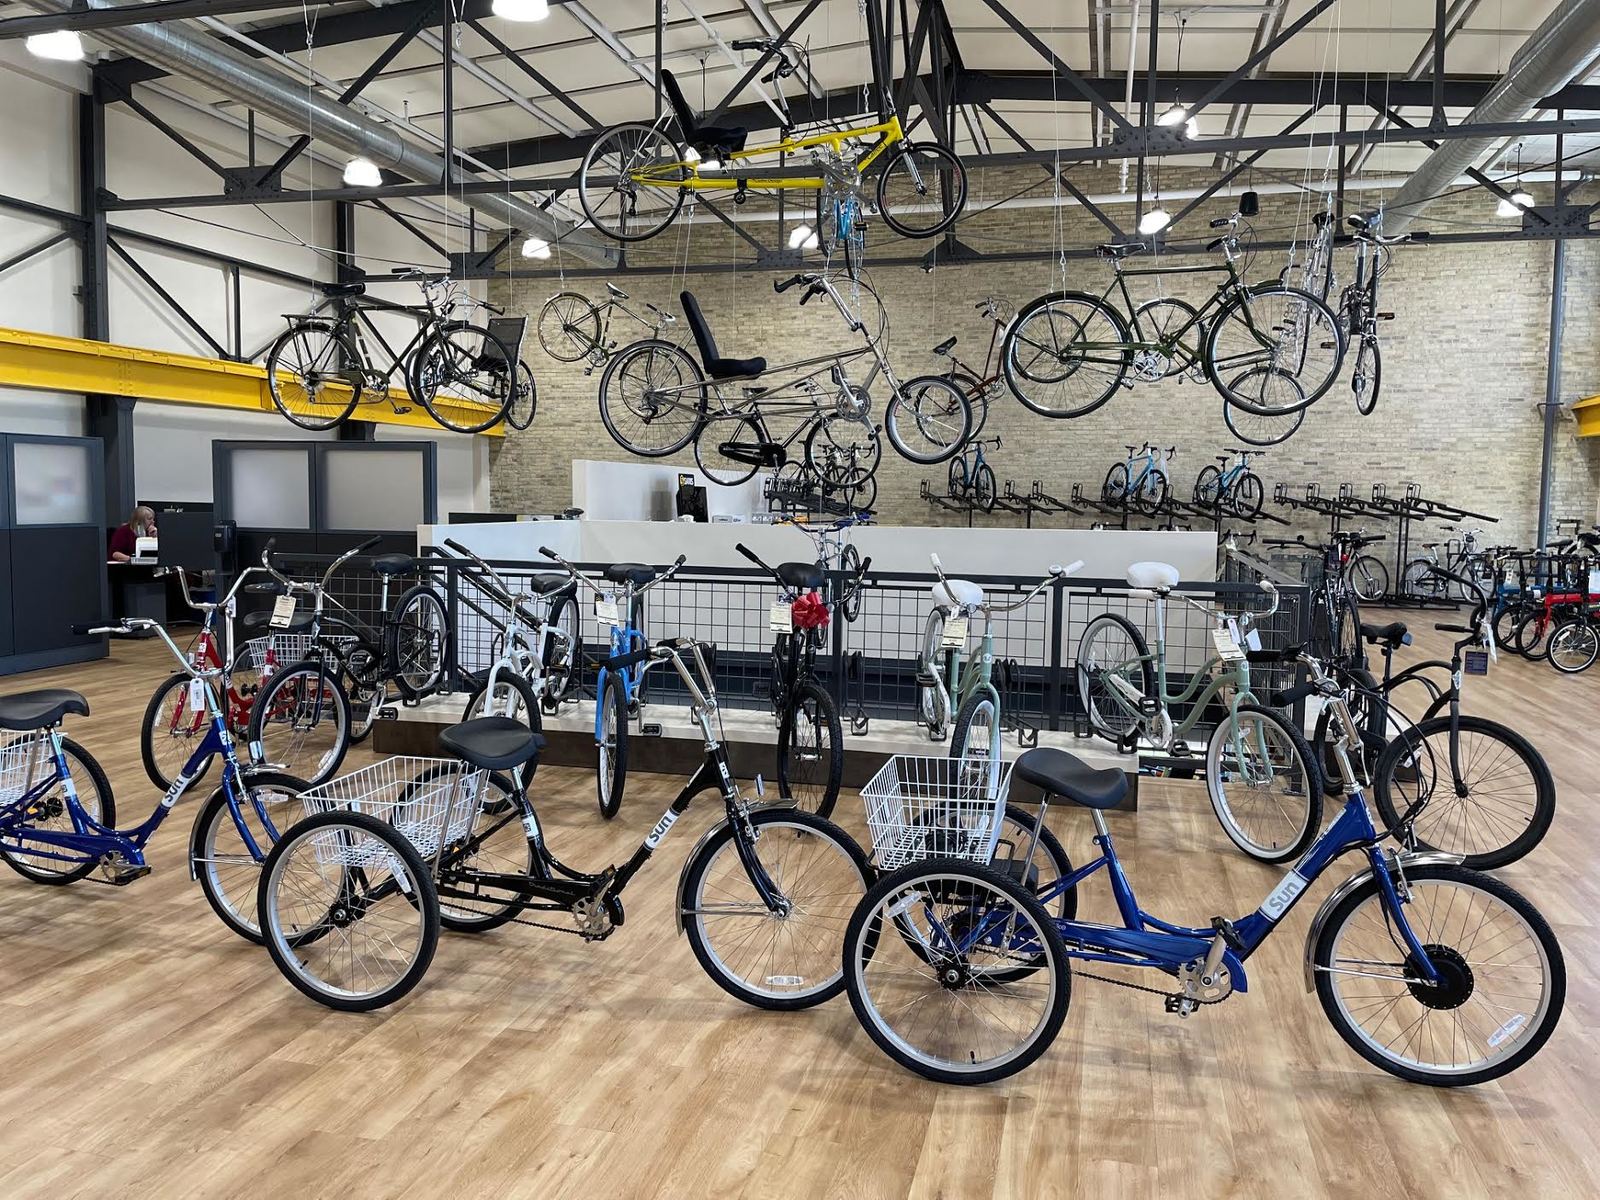 Bicycles are hot; here's where to buy 'em in Milwaukee - 44487eD8fba0f2b82D9D5c8e9a98eD4b9D67f7c75e21D8b1a6cDa1869e8697fD